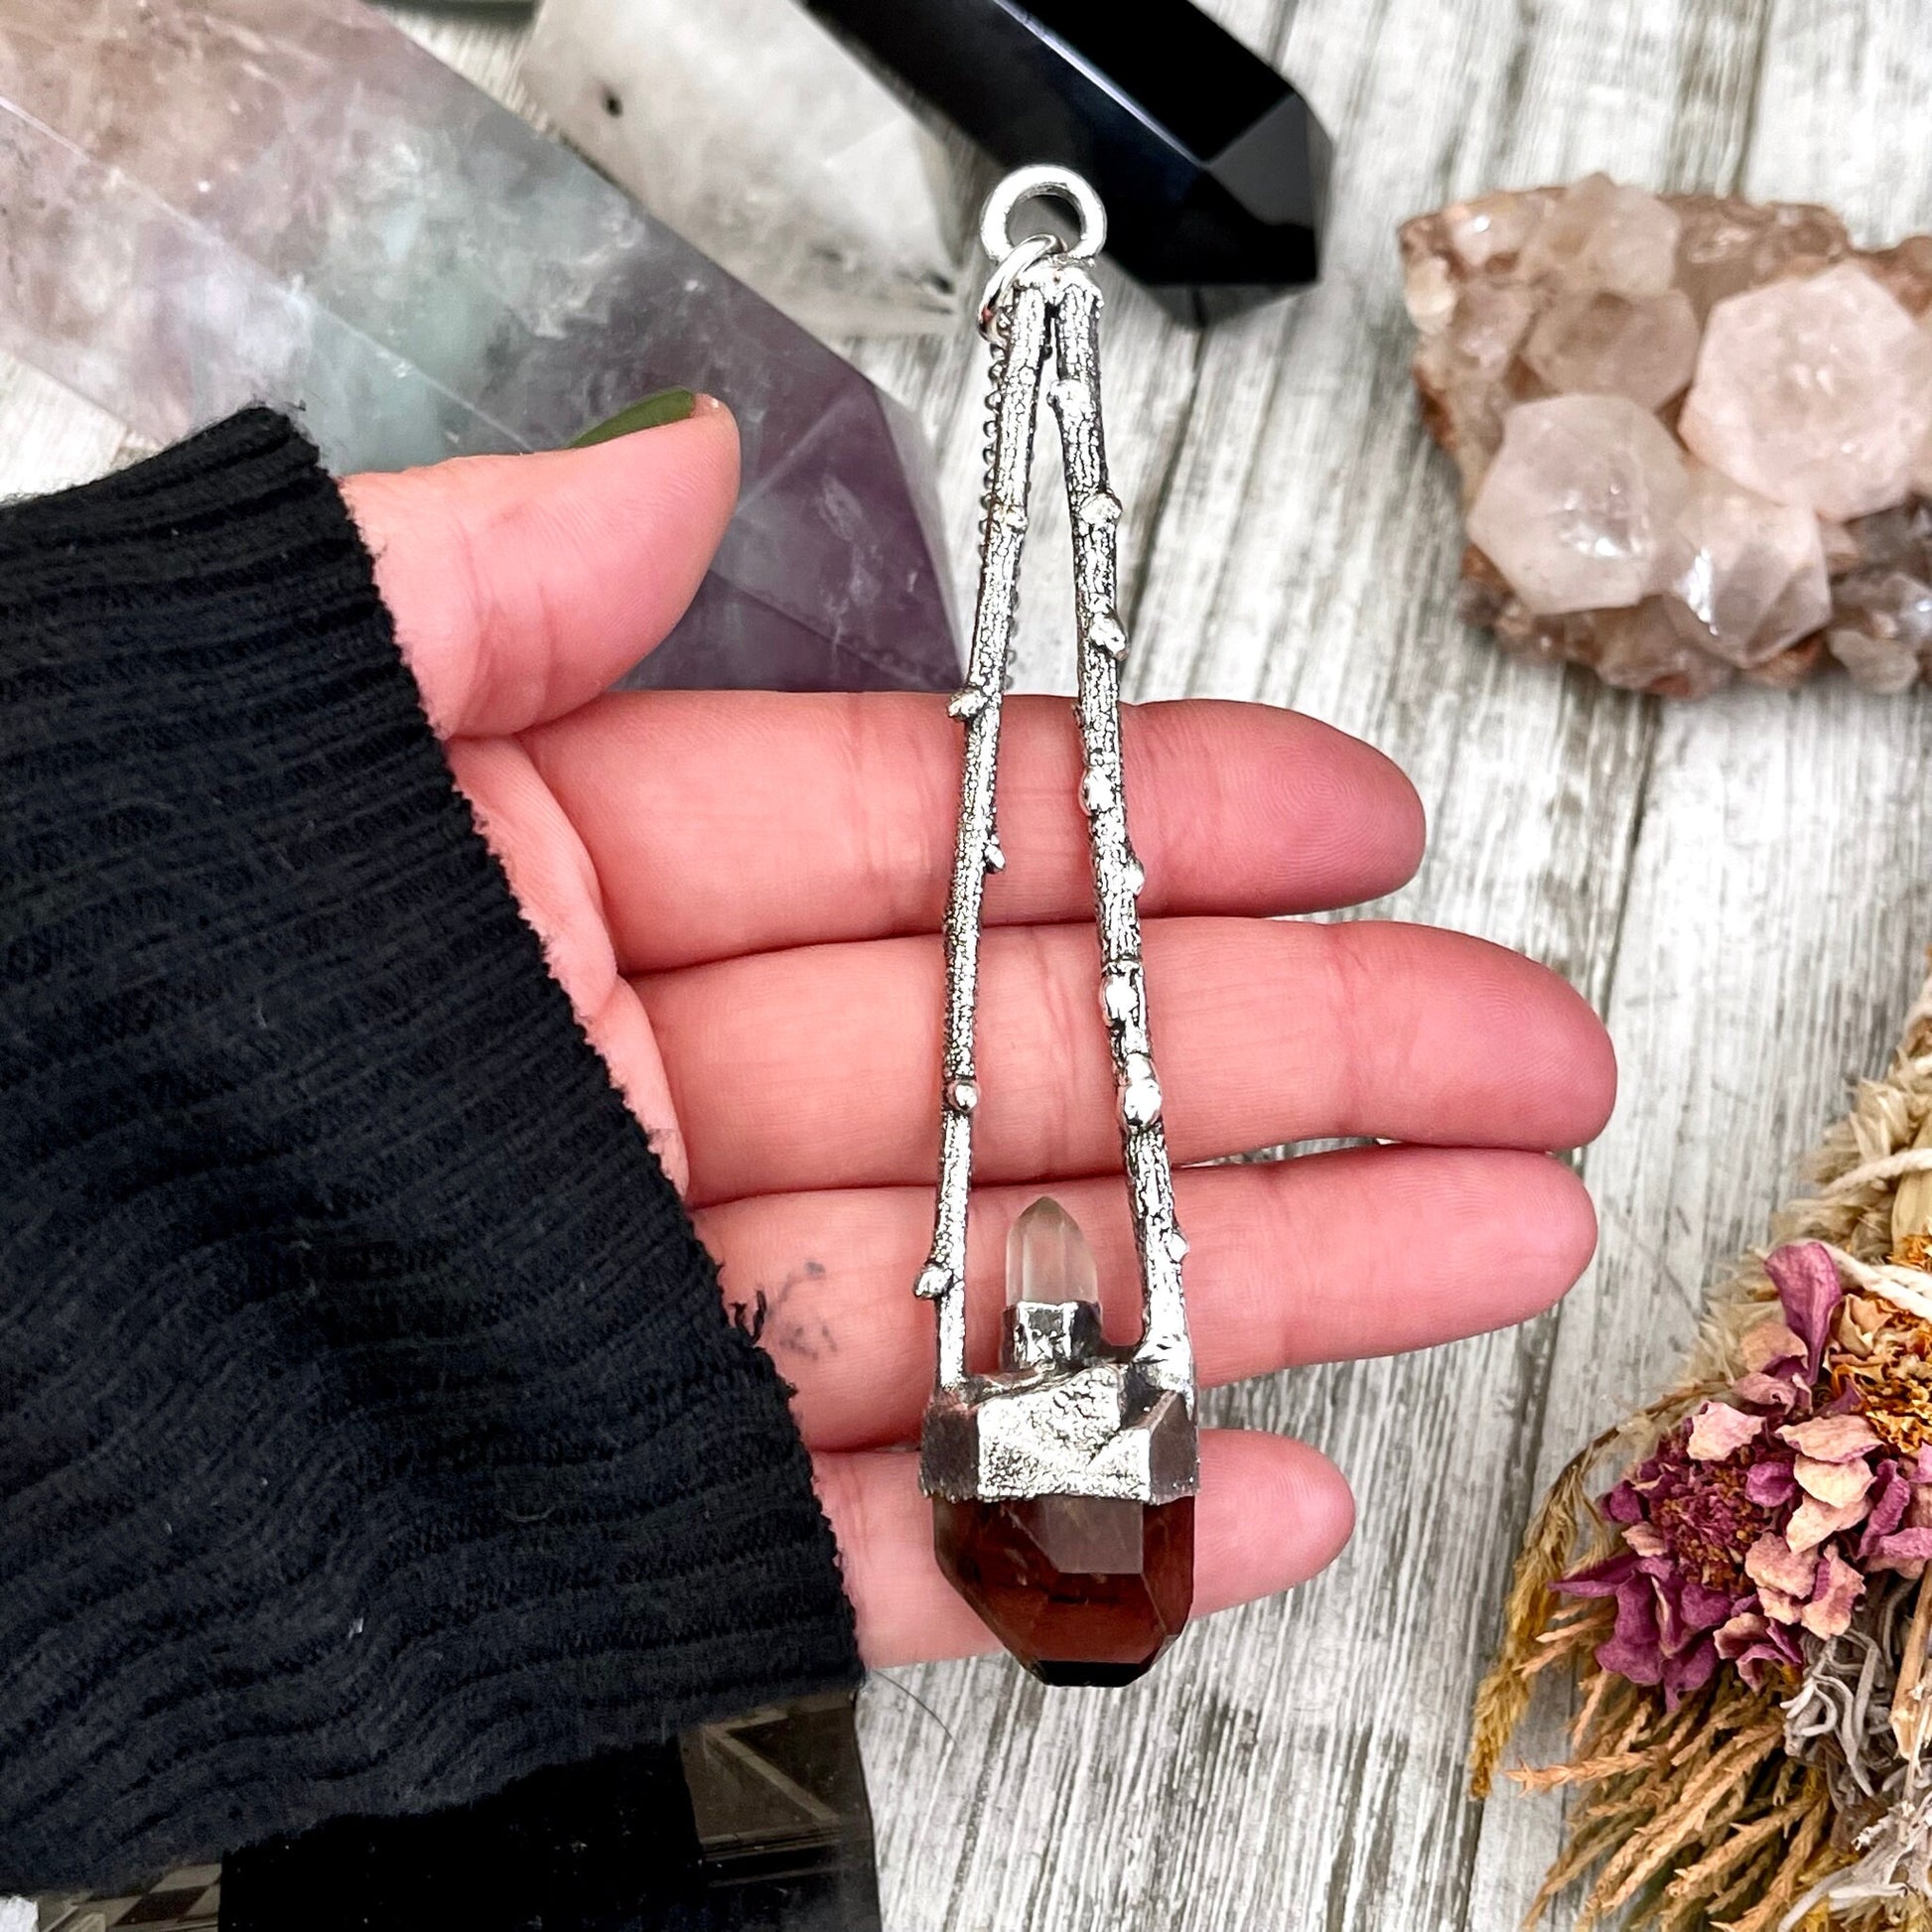 big crystal Necklace, Big Gothic Necklace, Bohemian Jewelry, Crystal Jewelry, Crystal Necklaces, Crystal Pendant, Etsy ID: 1655475970, FOXLARK- NECKLACES, Jewelry, nature inspired, Necklaces, Quartz Jewelry, Quartz pendent, Silver Jewelry, Silver Necklace